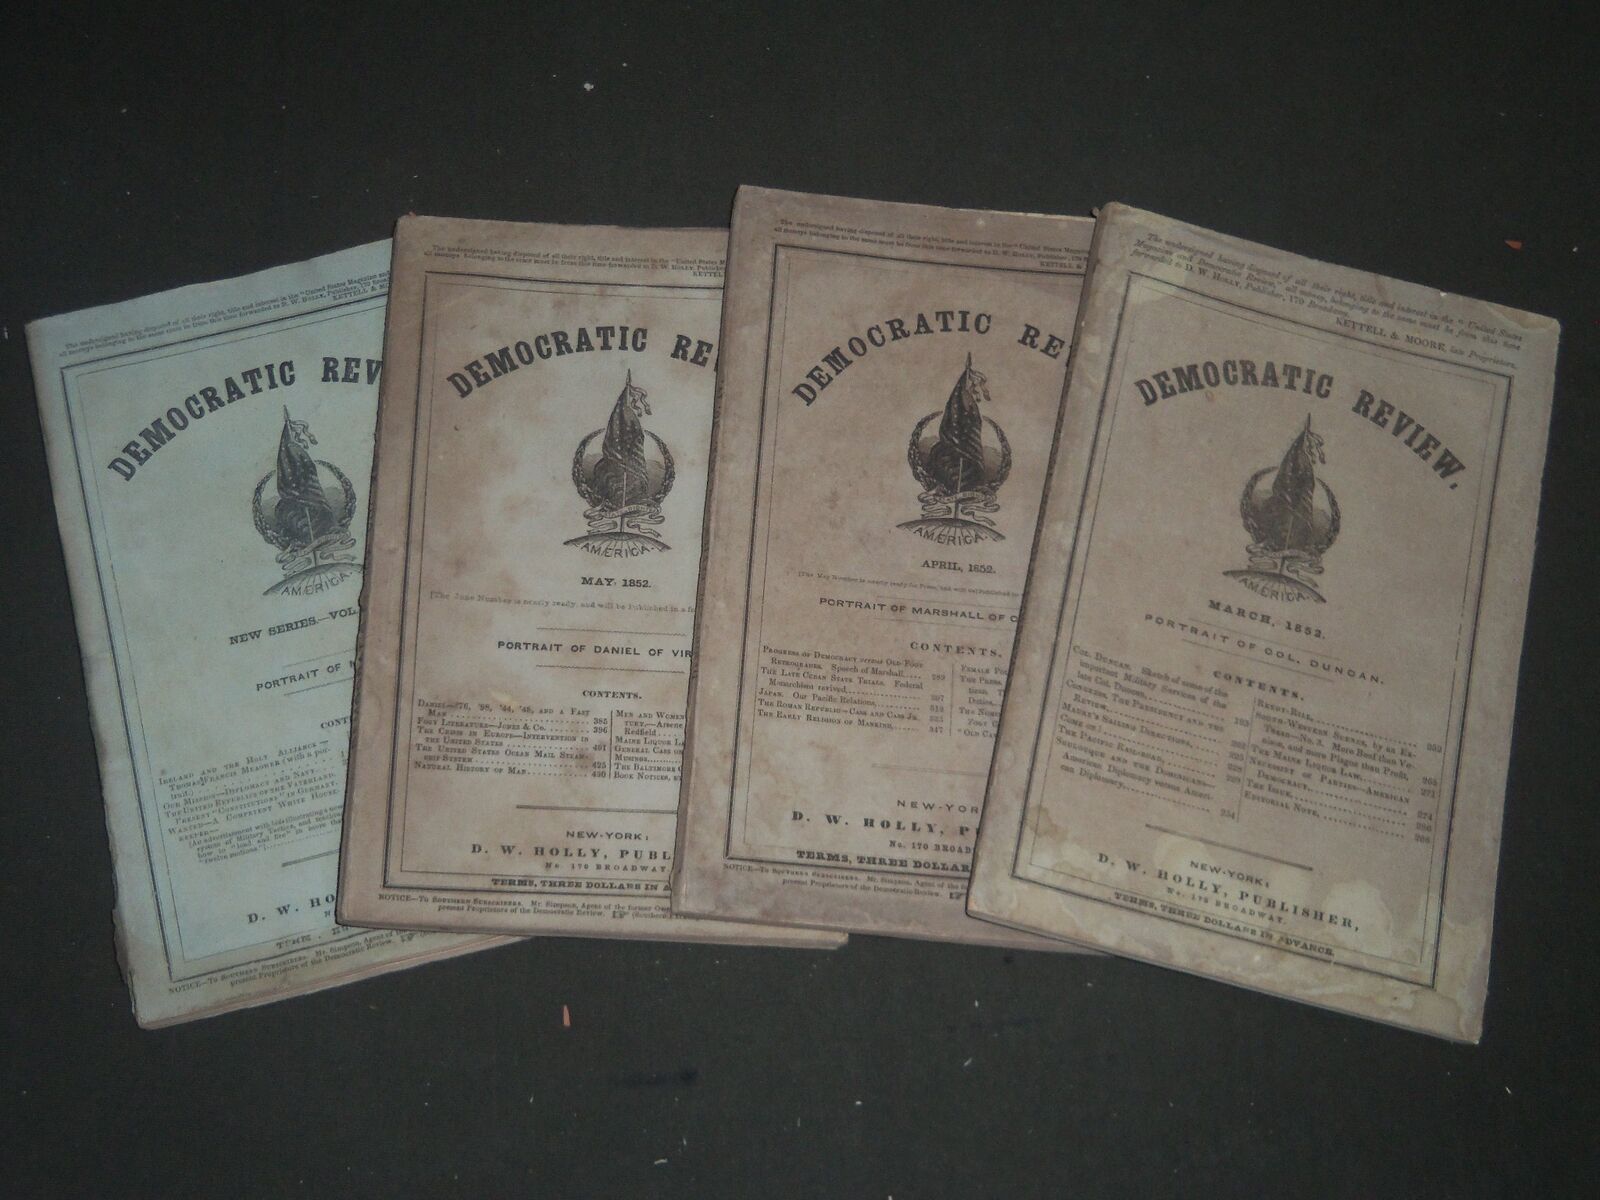 1852 THE DEMOCRATIC REVIEW LOT OF 4 ISSUES - NICE ENGRAVINGS - WR 1274